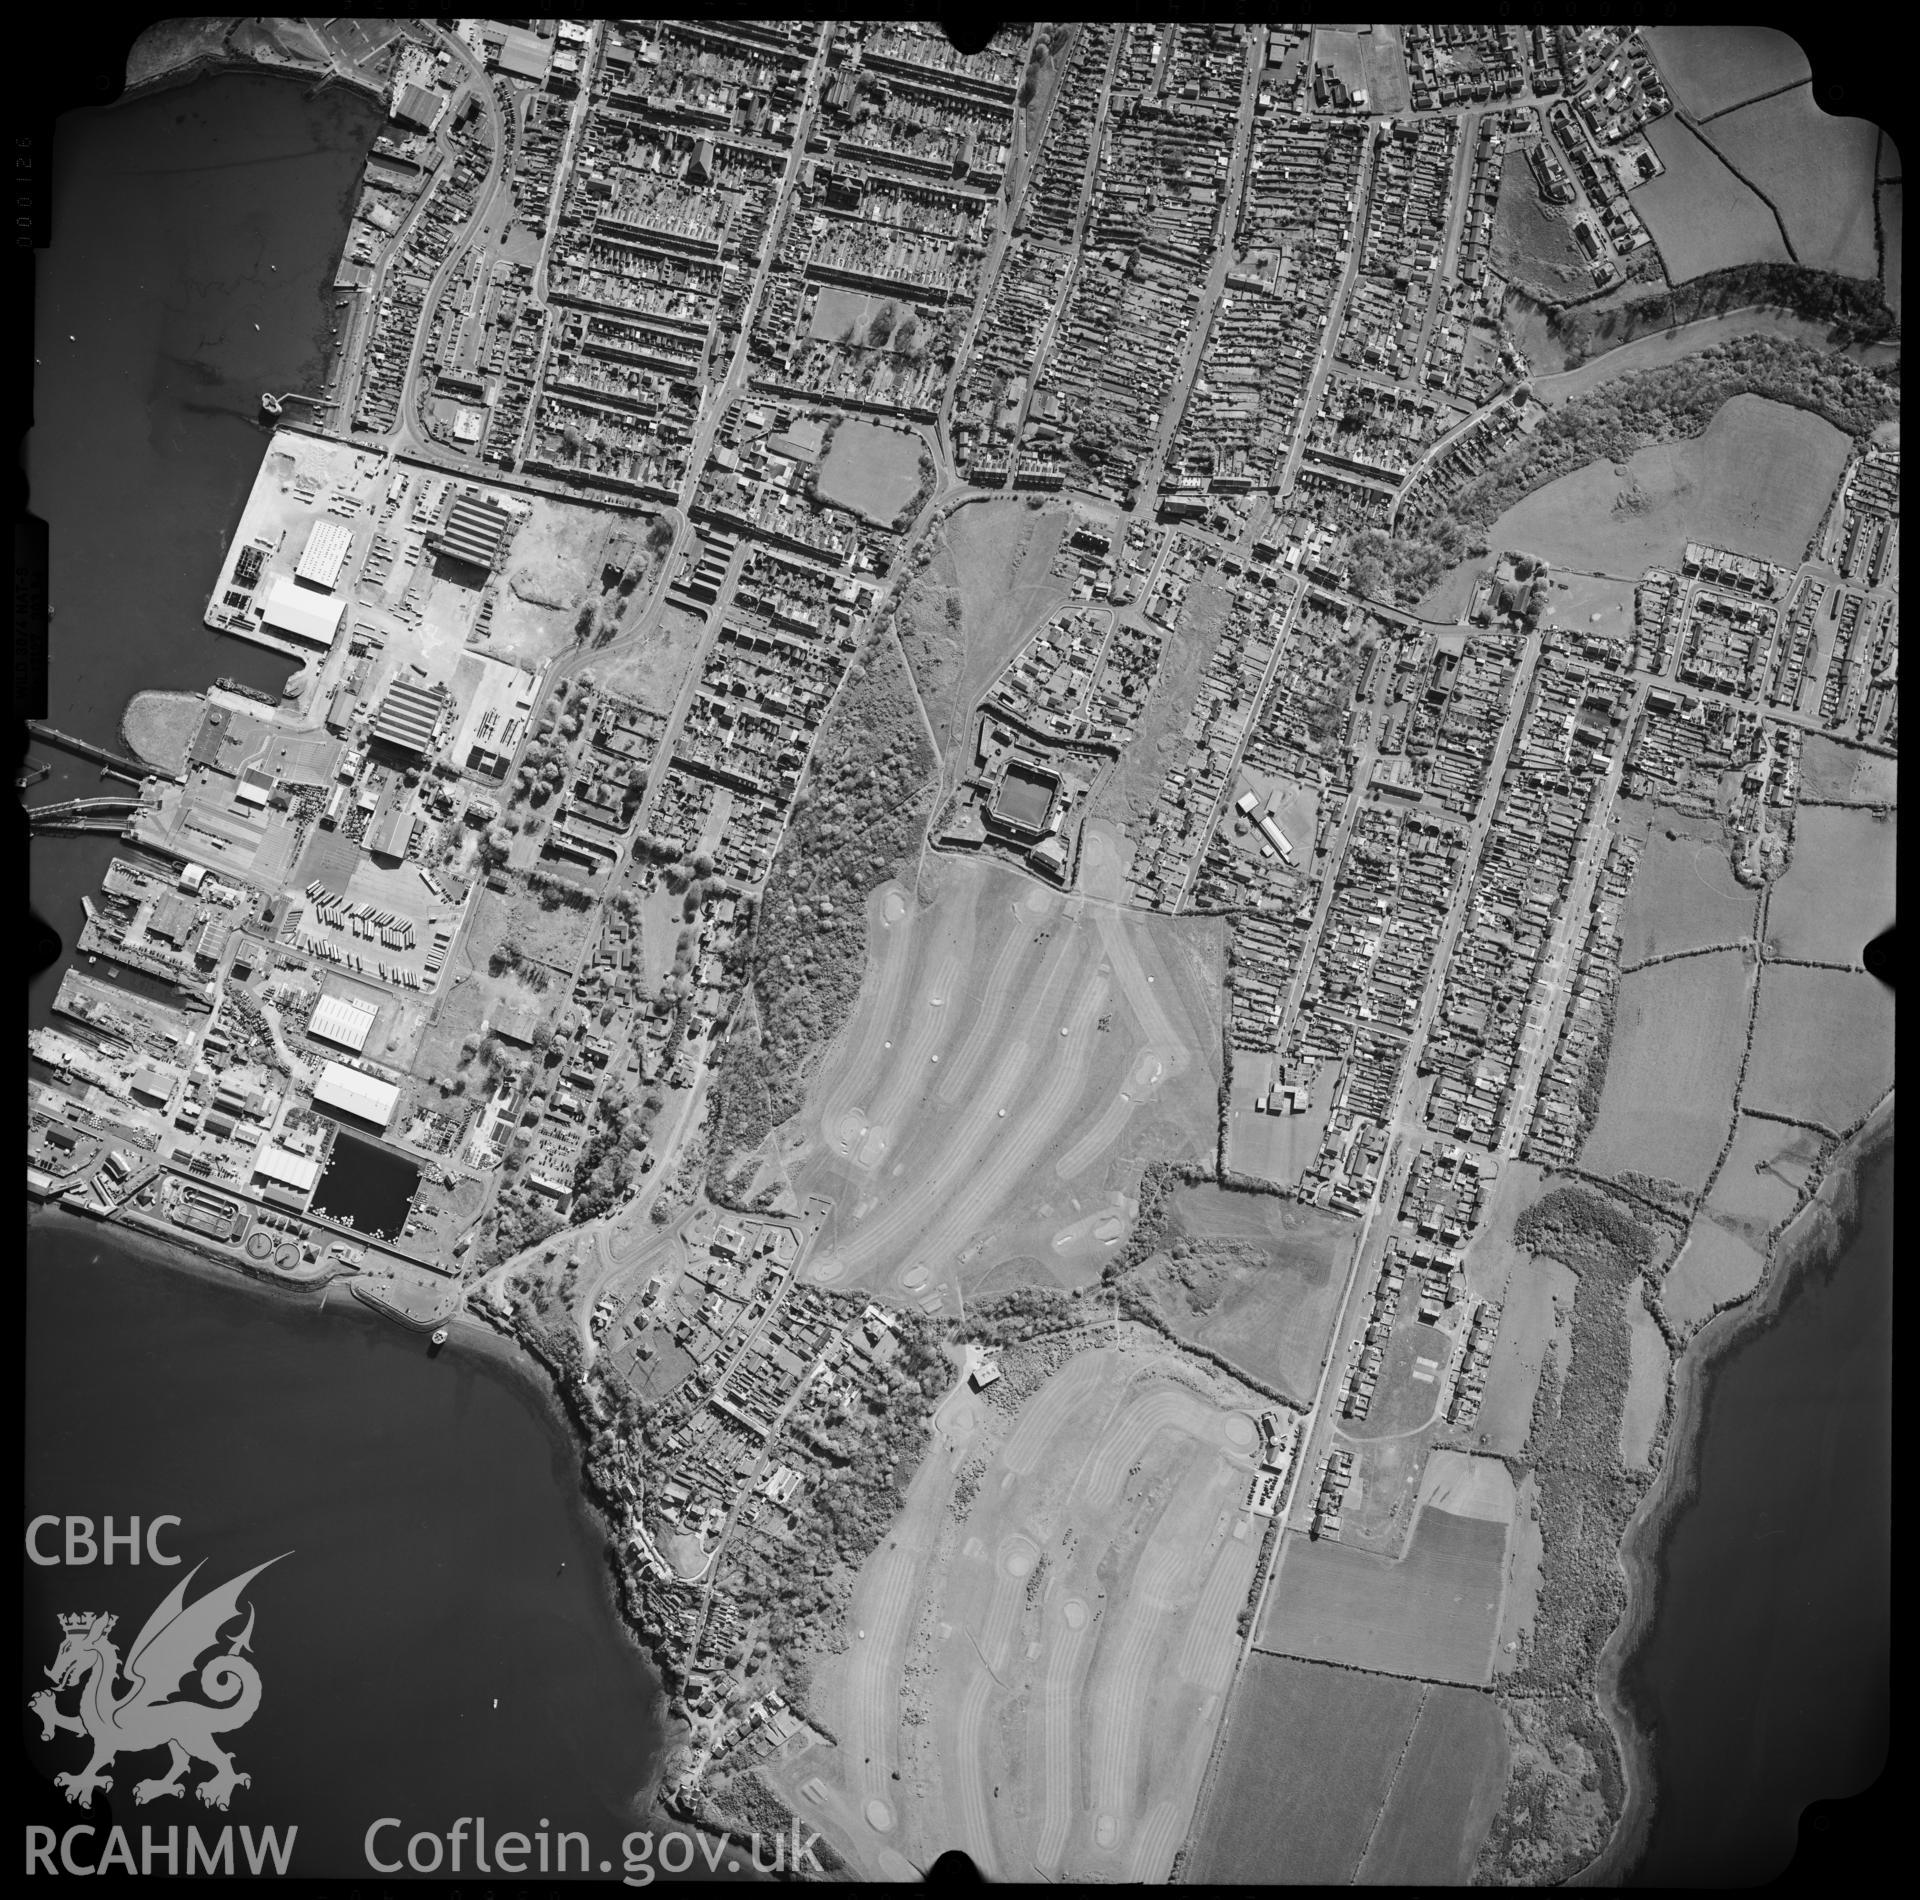 Digitized copy of an aerial photograph showing part of Pembroke Dock, with Barrack Hill Defenceable Barracks, taken by Ordnance Survey, 8th August 2001.